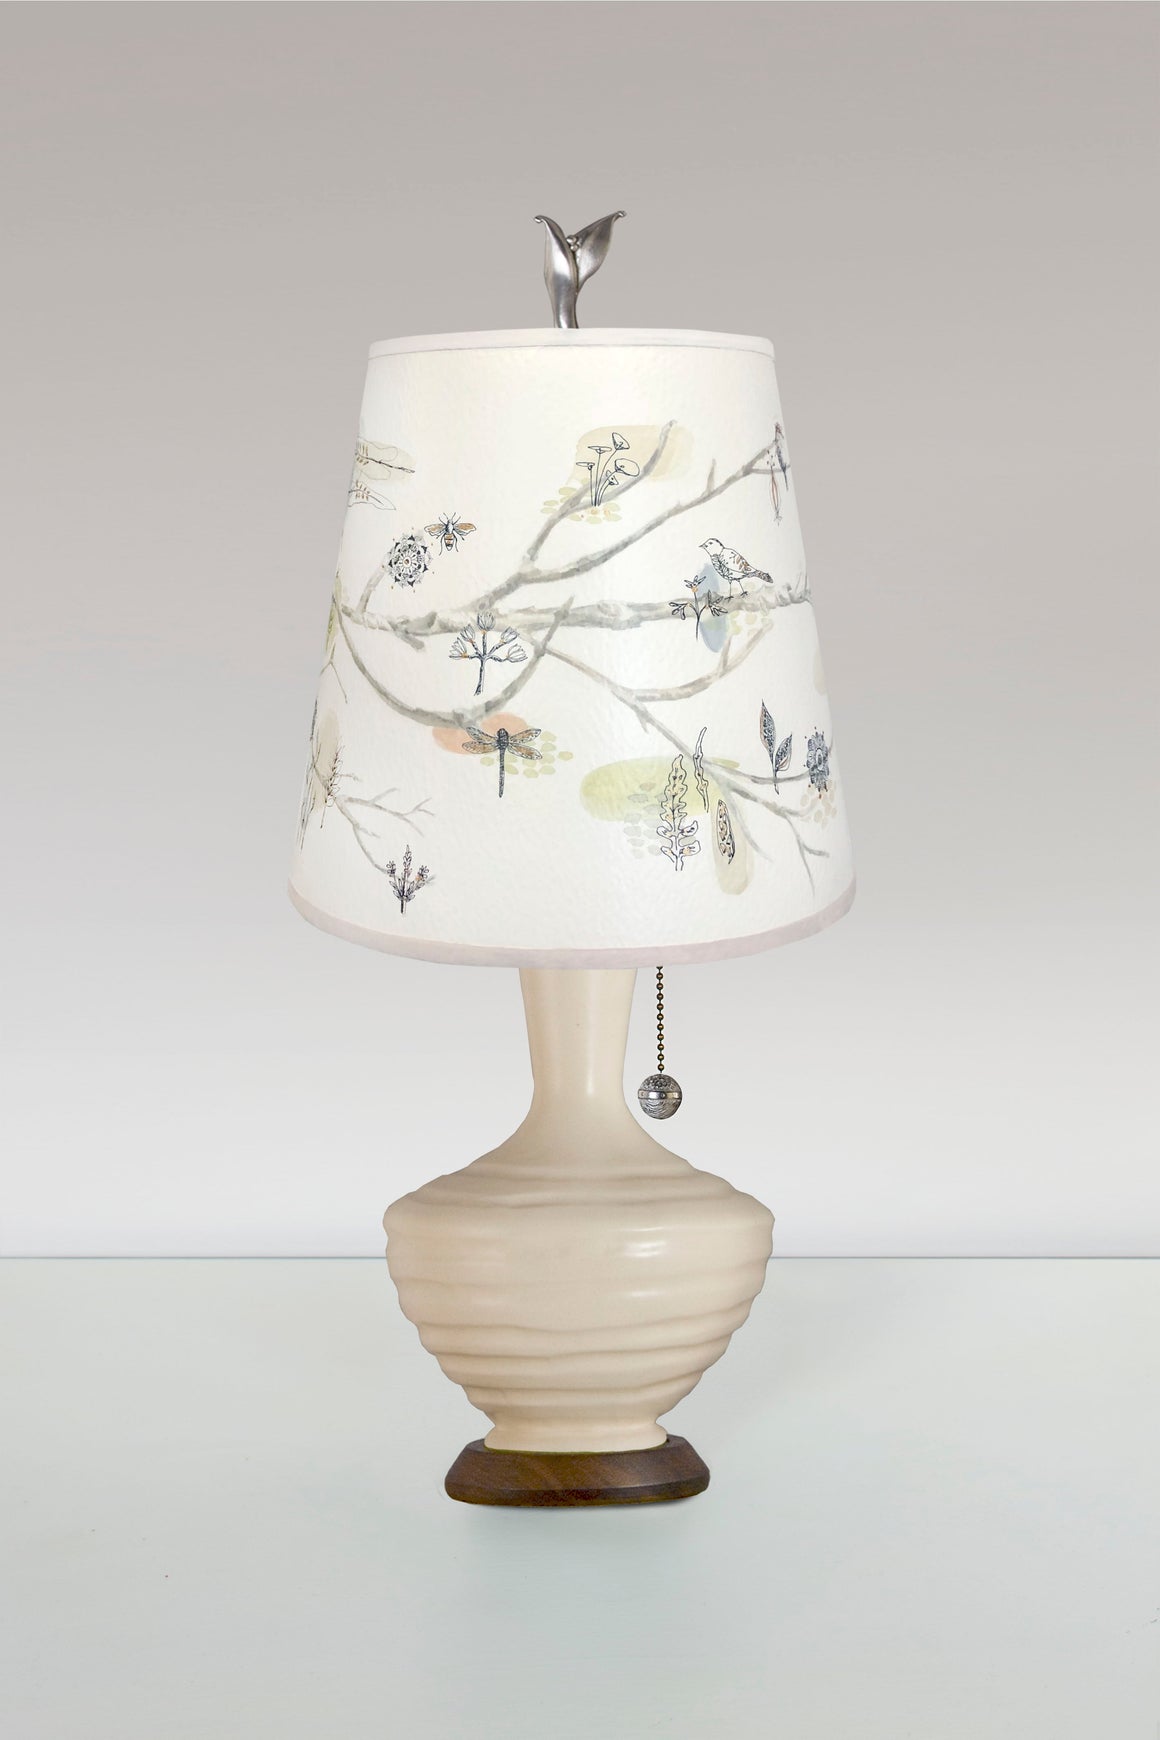 Ceramic Table Lamp with Small Drum Shade in Artful Branch